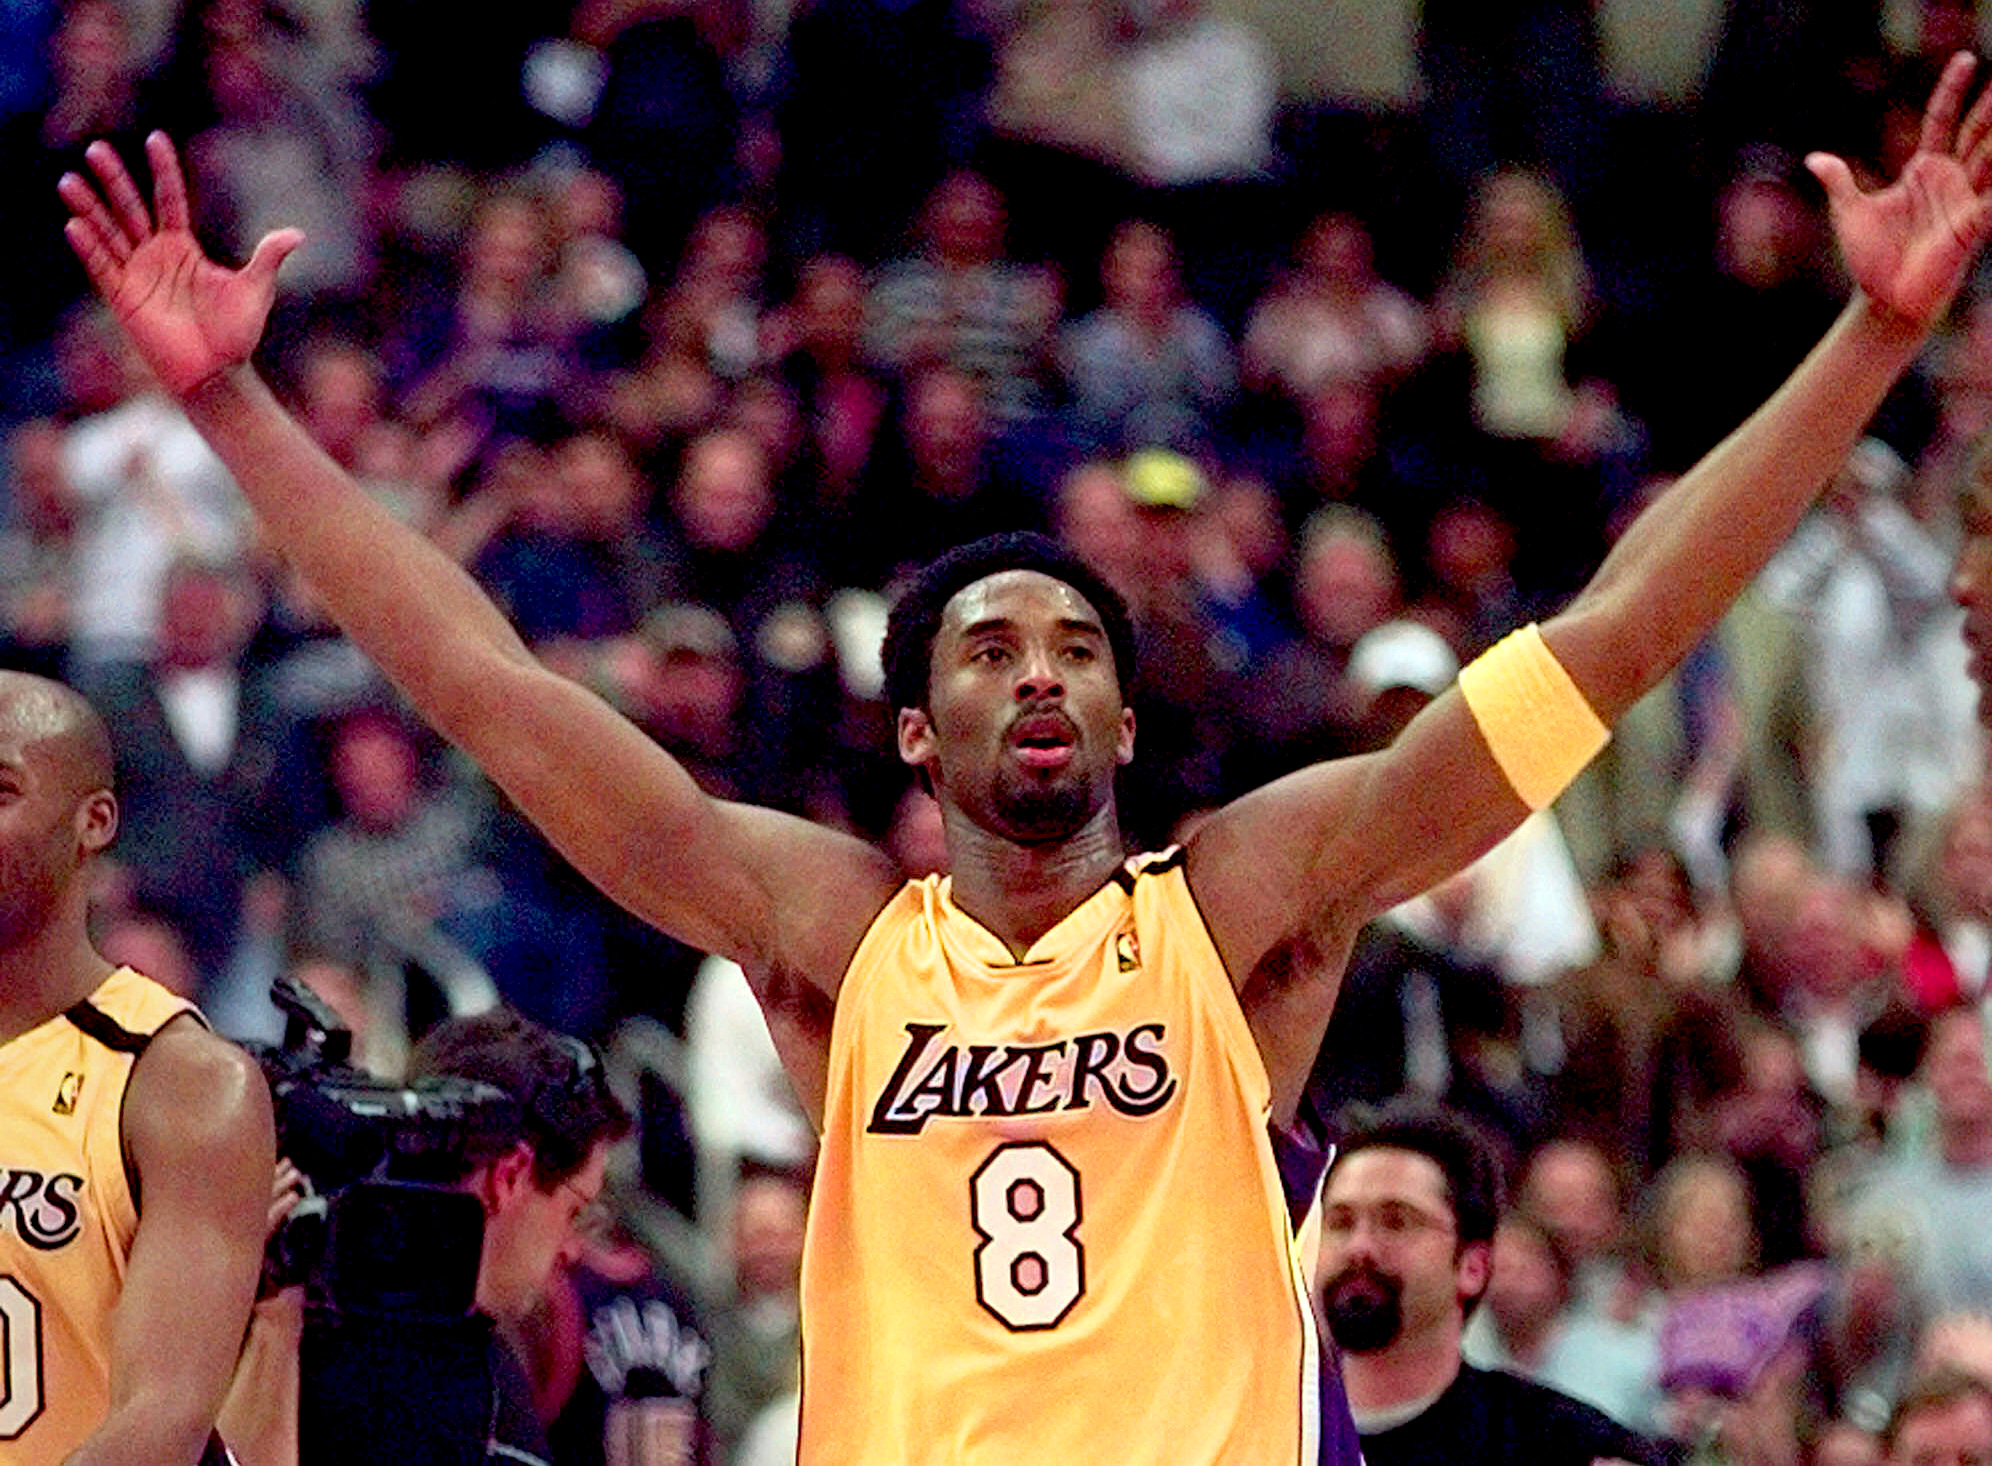 15 Kobe Bryant Quotes From His Legendary Career That Will Inspire You